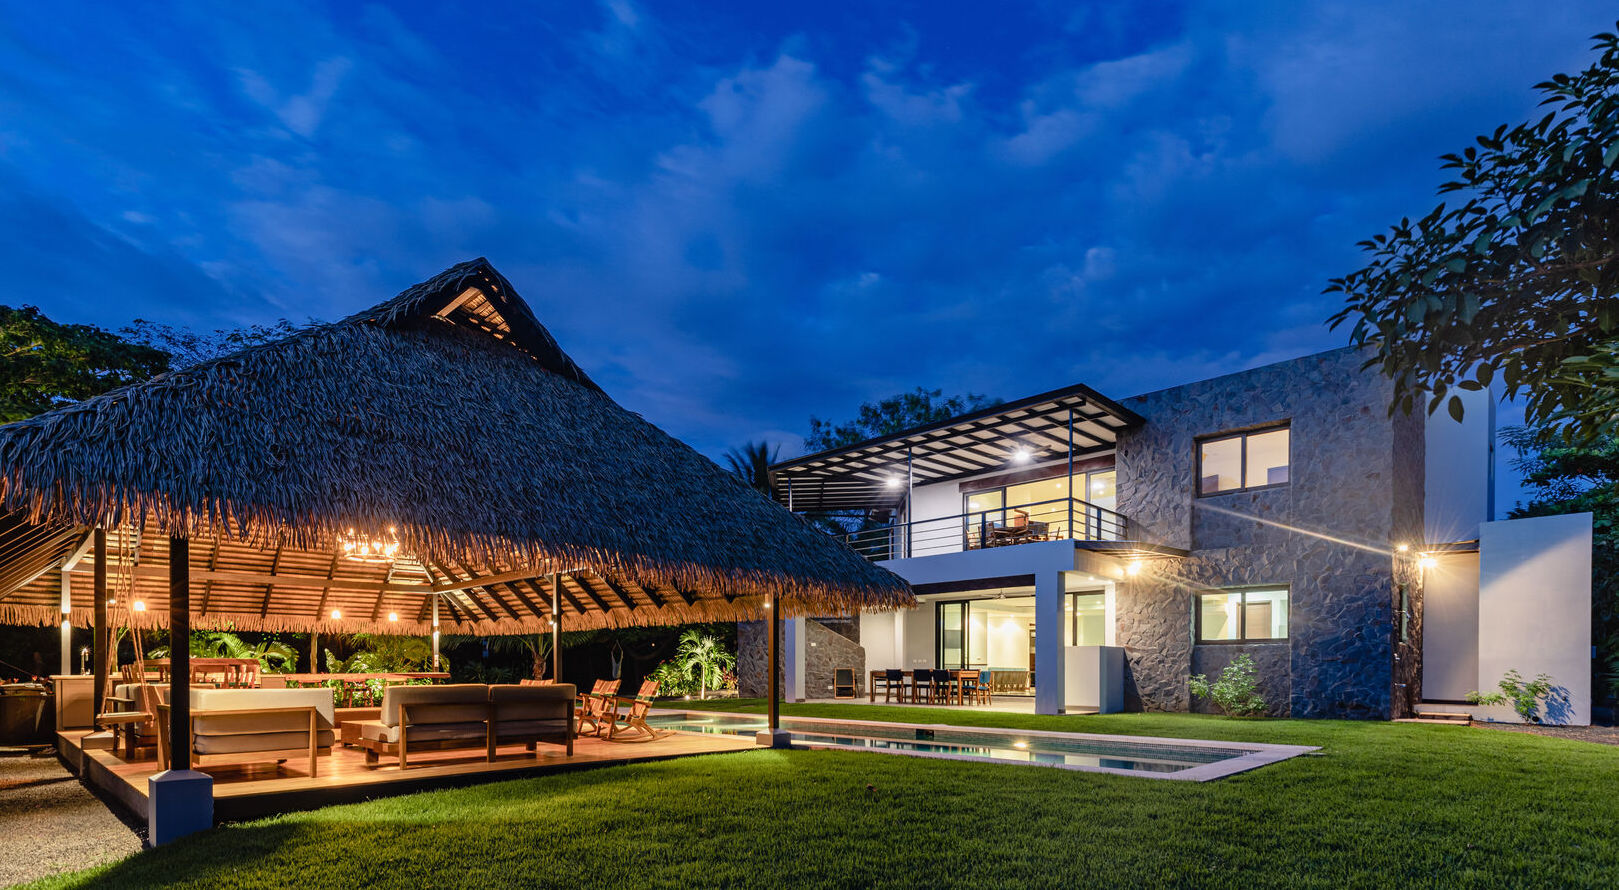 6 Amazing Costa Rica Luxury Vacation Villas for New Year’s 2020/2021